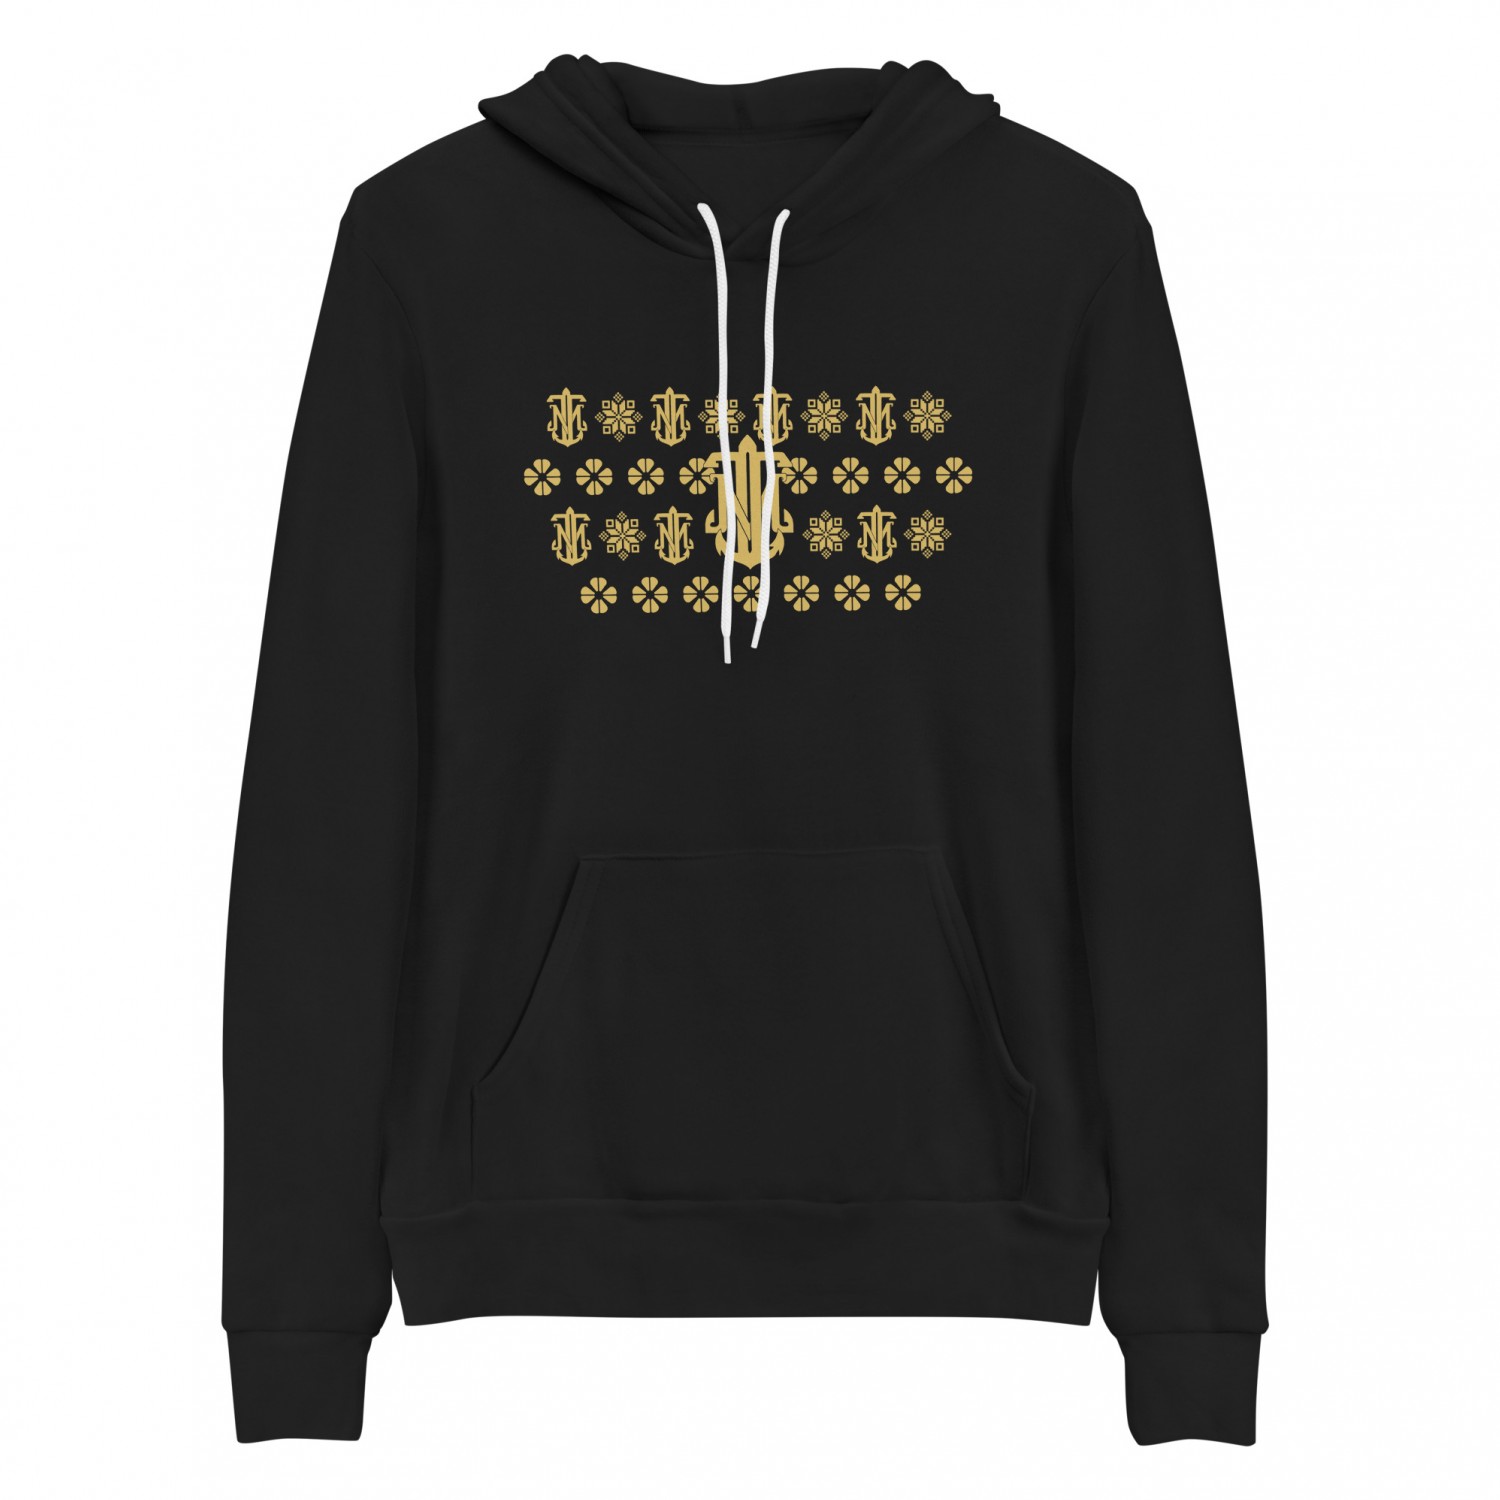 Buy Hoodie "Veles World" with an anchor